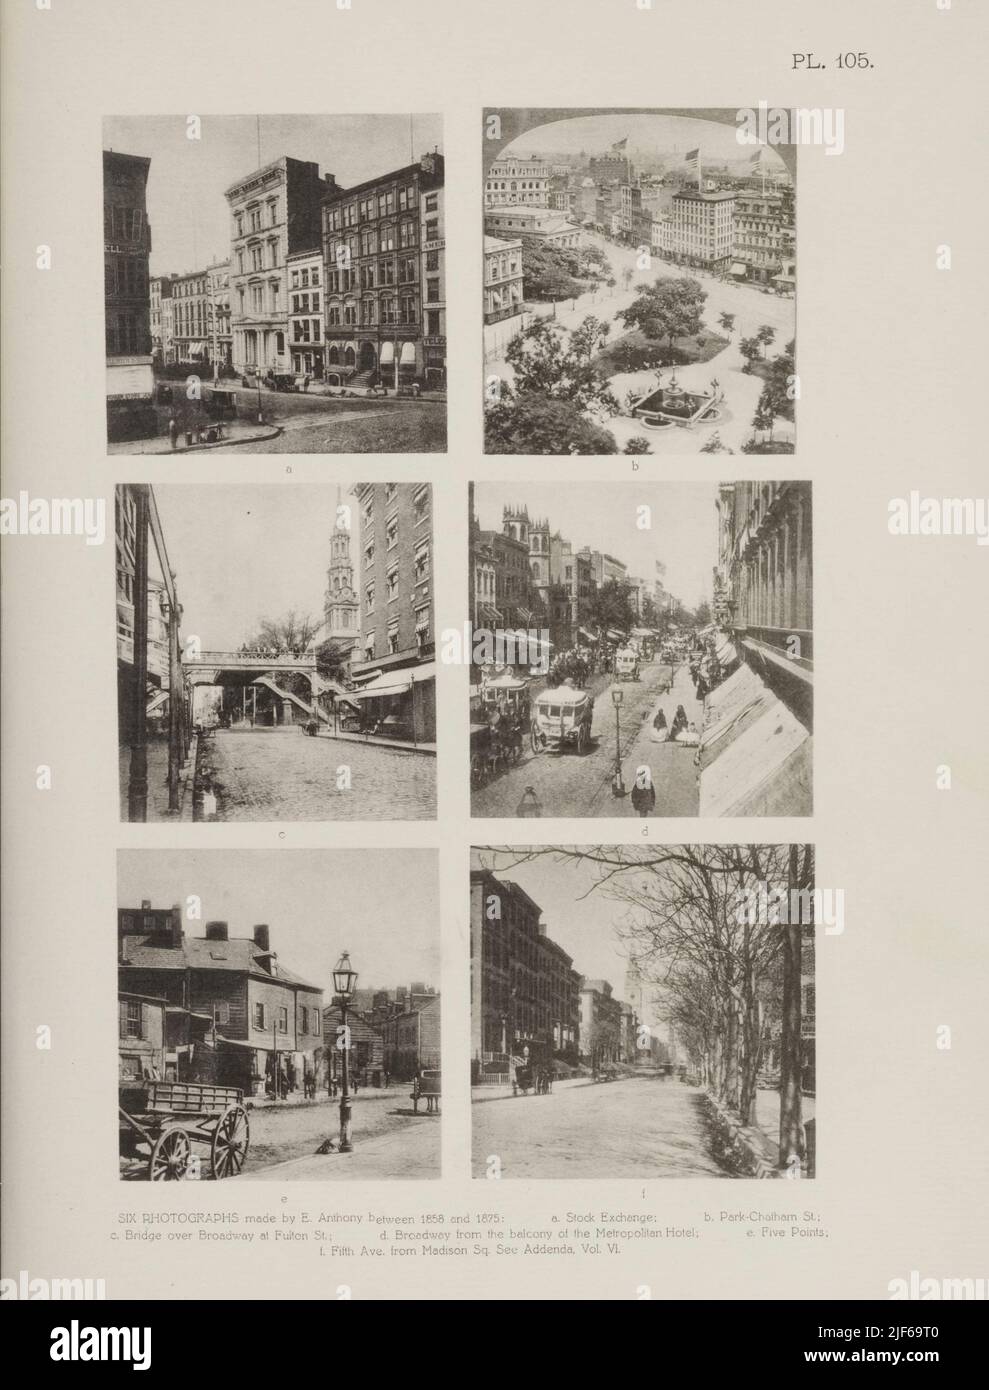 SIX PHOTOGRAPHS MADE BY E. ANTHONY BETWEEN 1858 AND 1875; a. STOCK EXCHANGE; b, PARK-CHATHAM STS. ; c. BRIDGE OVER BROADWAY AT FULTON ST.; d. BROAD- WAY FROM THE BALCONY OF THE METROPOLITAN HOTEL; €. FIVE POINTS; f, FIFTH AVE. FROM MADISON SQ From the book The iconography of Manhattan Island, 1498-1909 compiled from original sources and illustrated by photo-intaglio reproductions of important maps, plans, views, and documents in public and private collections - Volume 6 Stock Photo